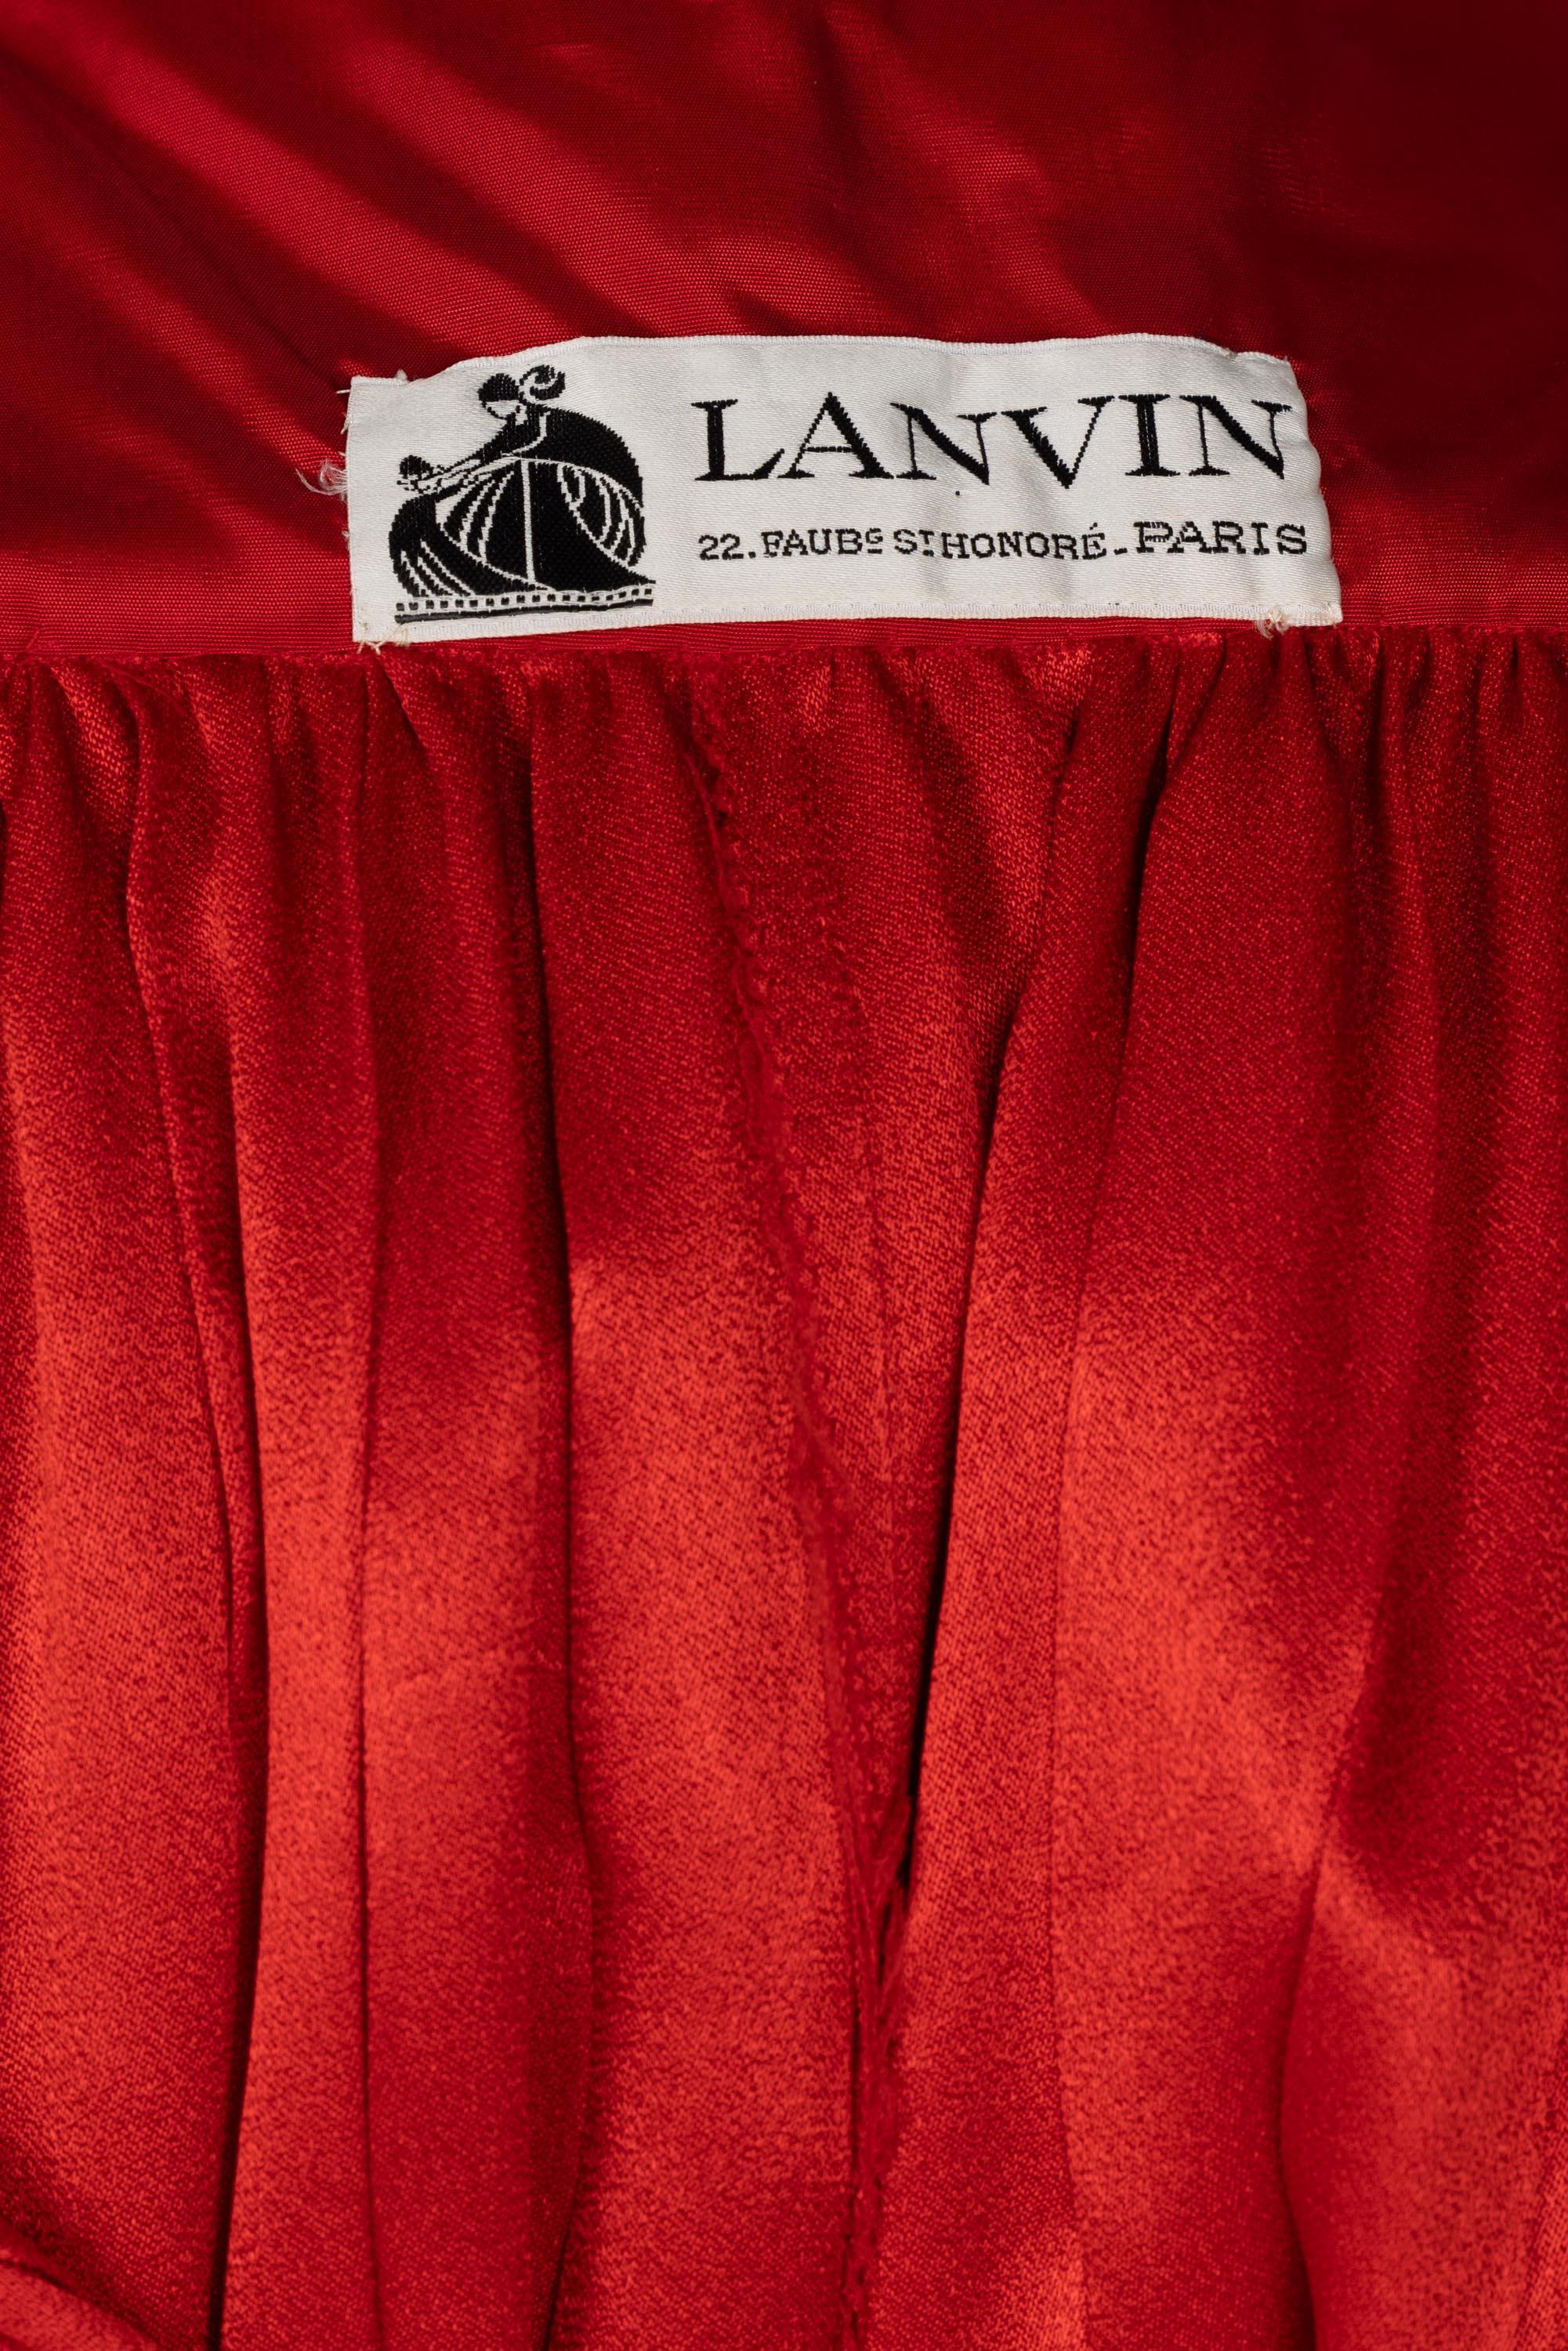 Lanvin Jules-François Crahay Demi Couture Red Pleated Brocade Maxi Skirt 1970s For Sale 4